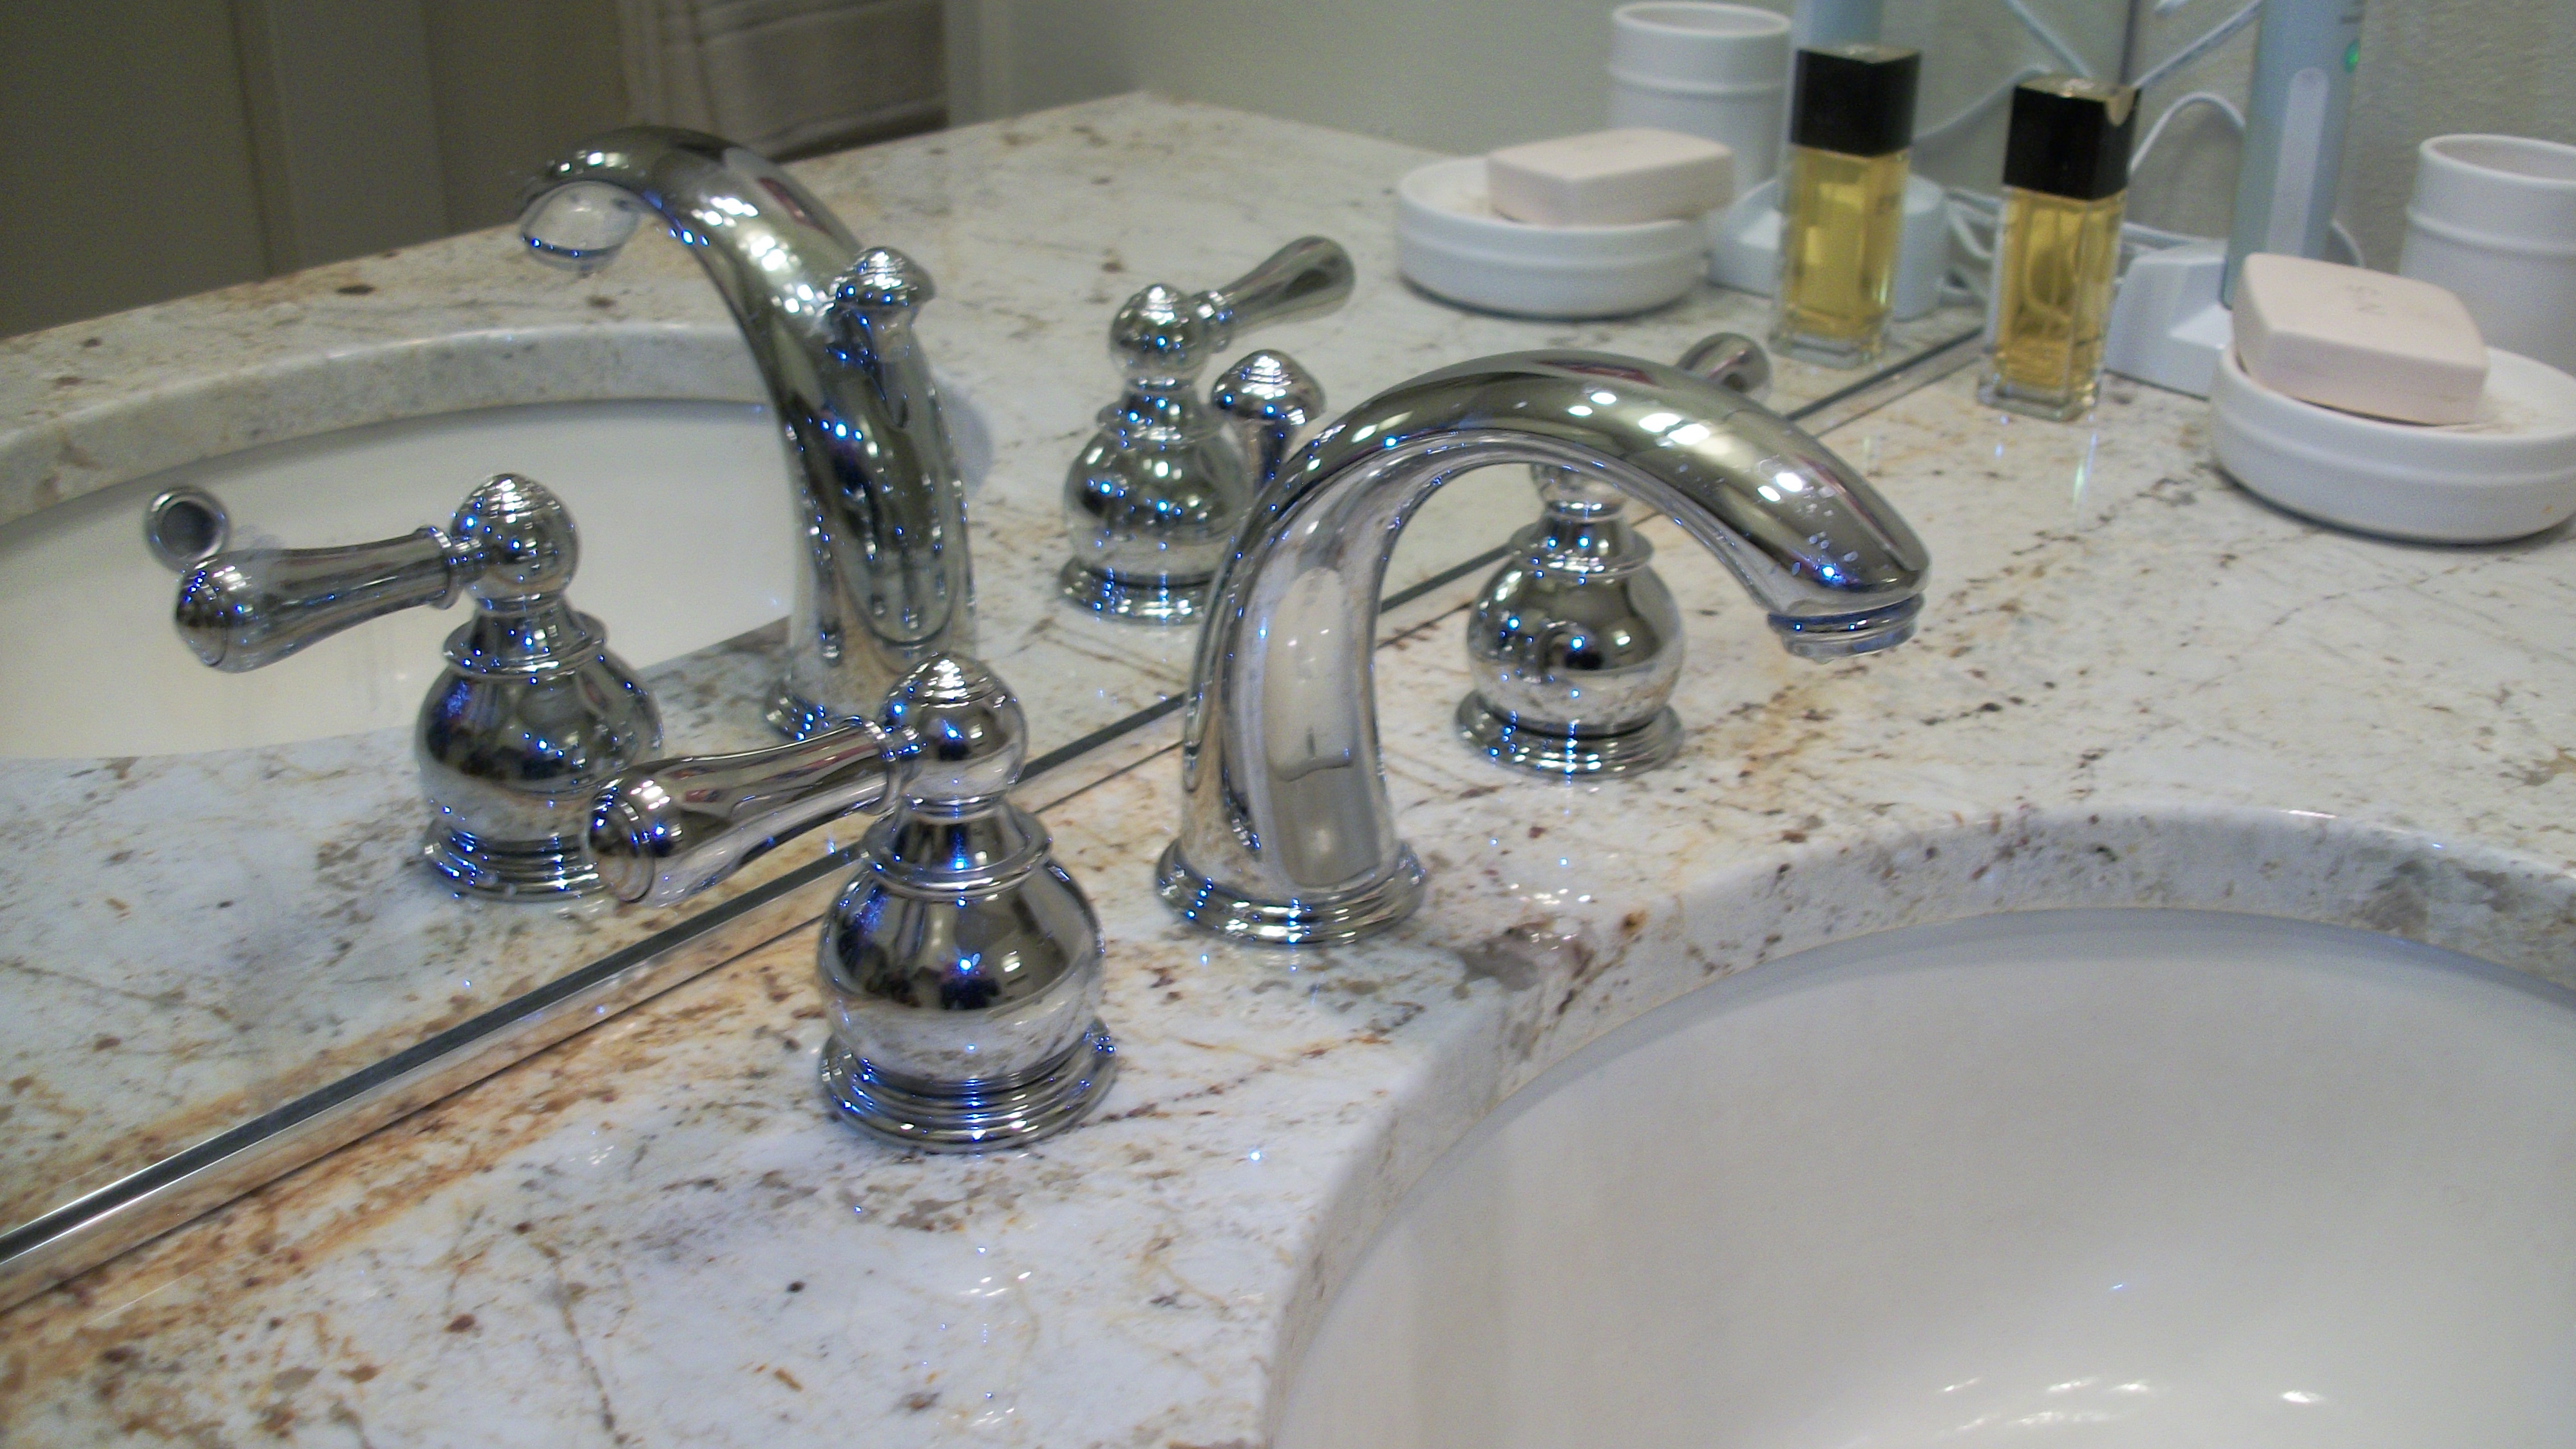 lave faucet - you use this more than any other fixture in the bathroom